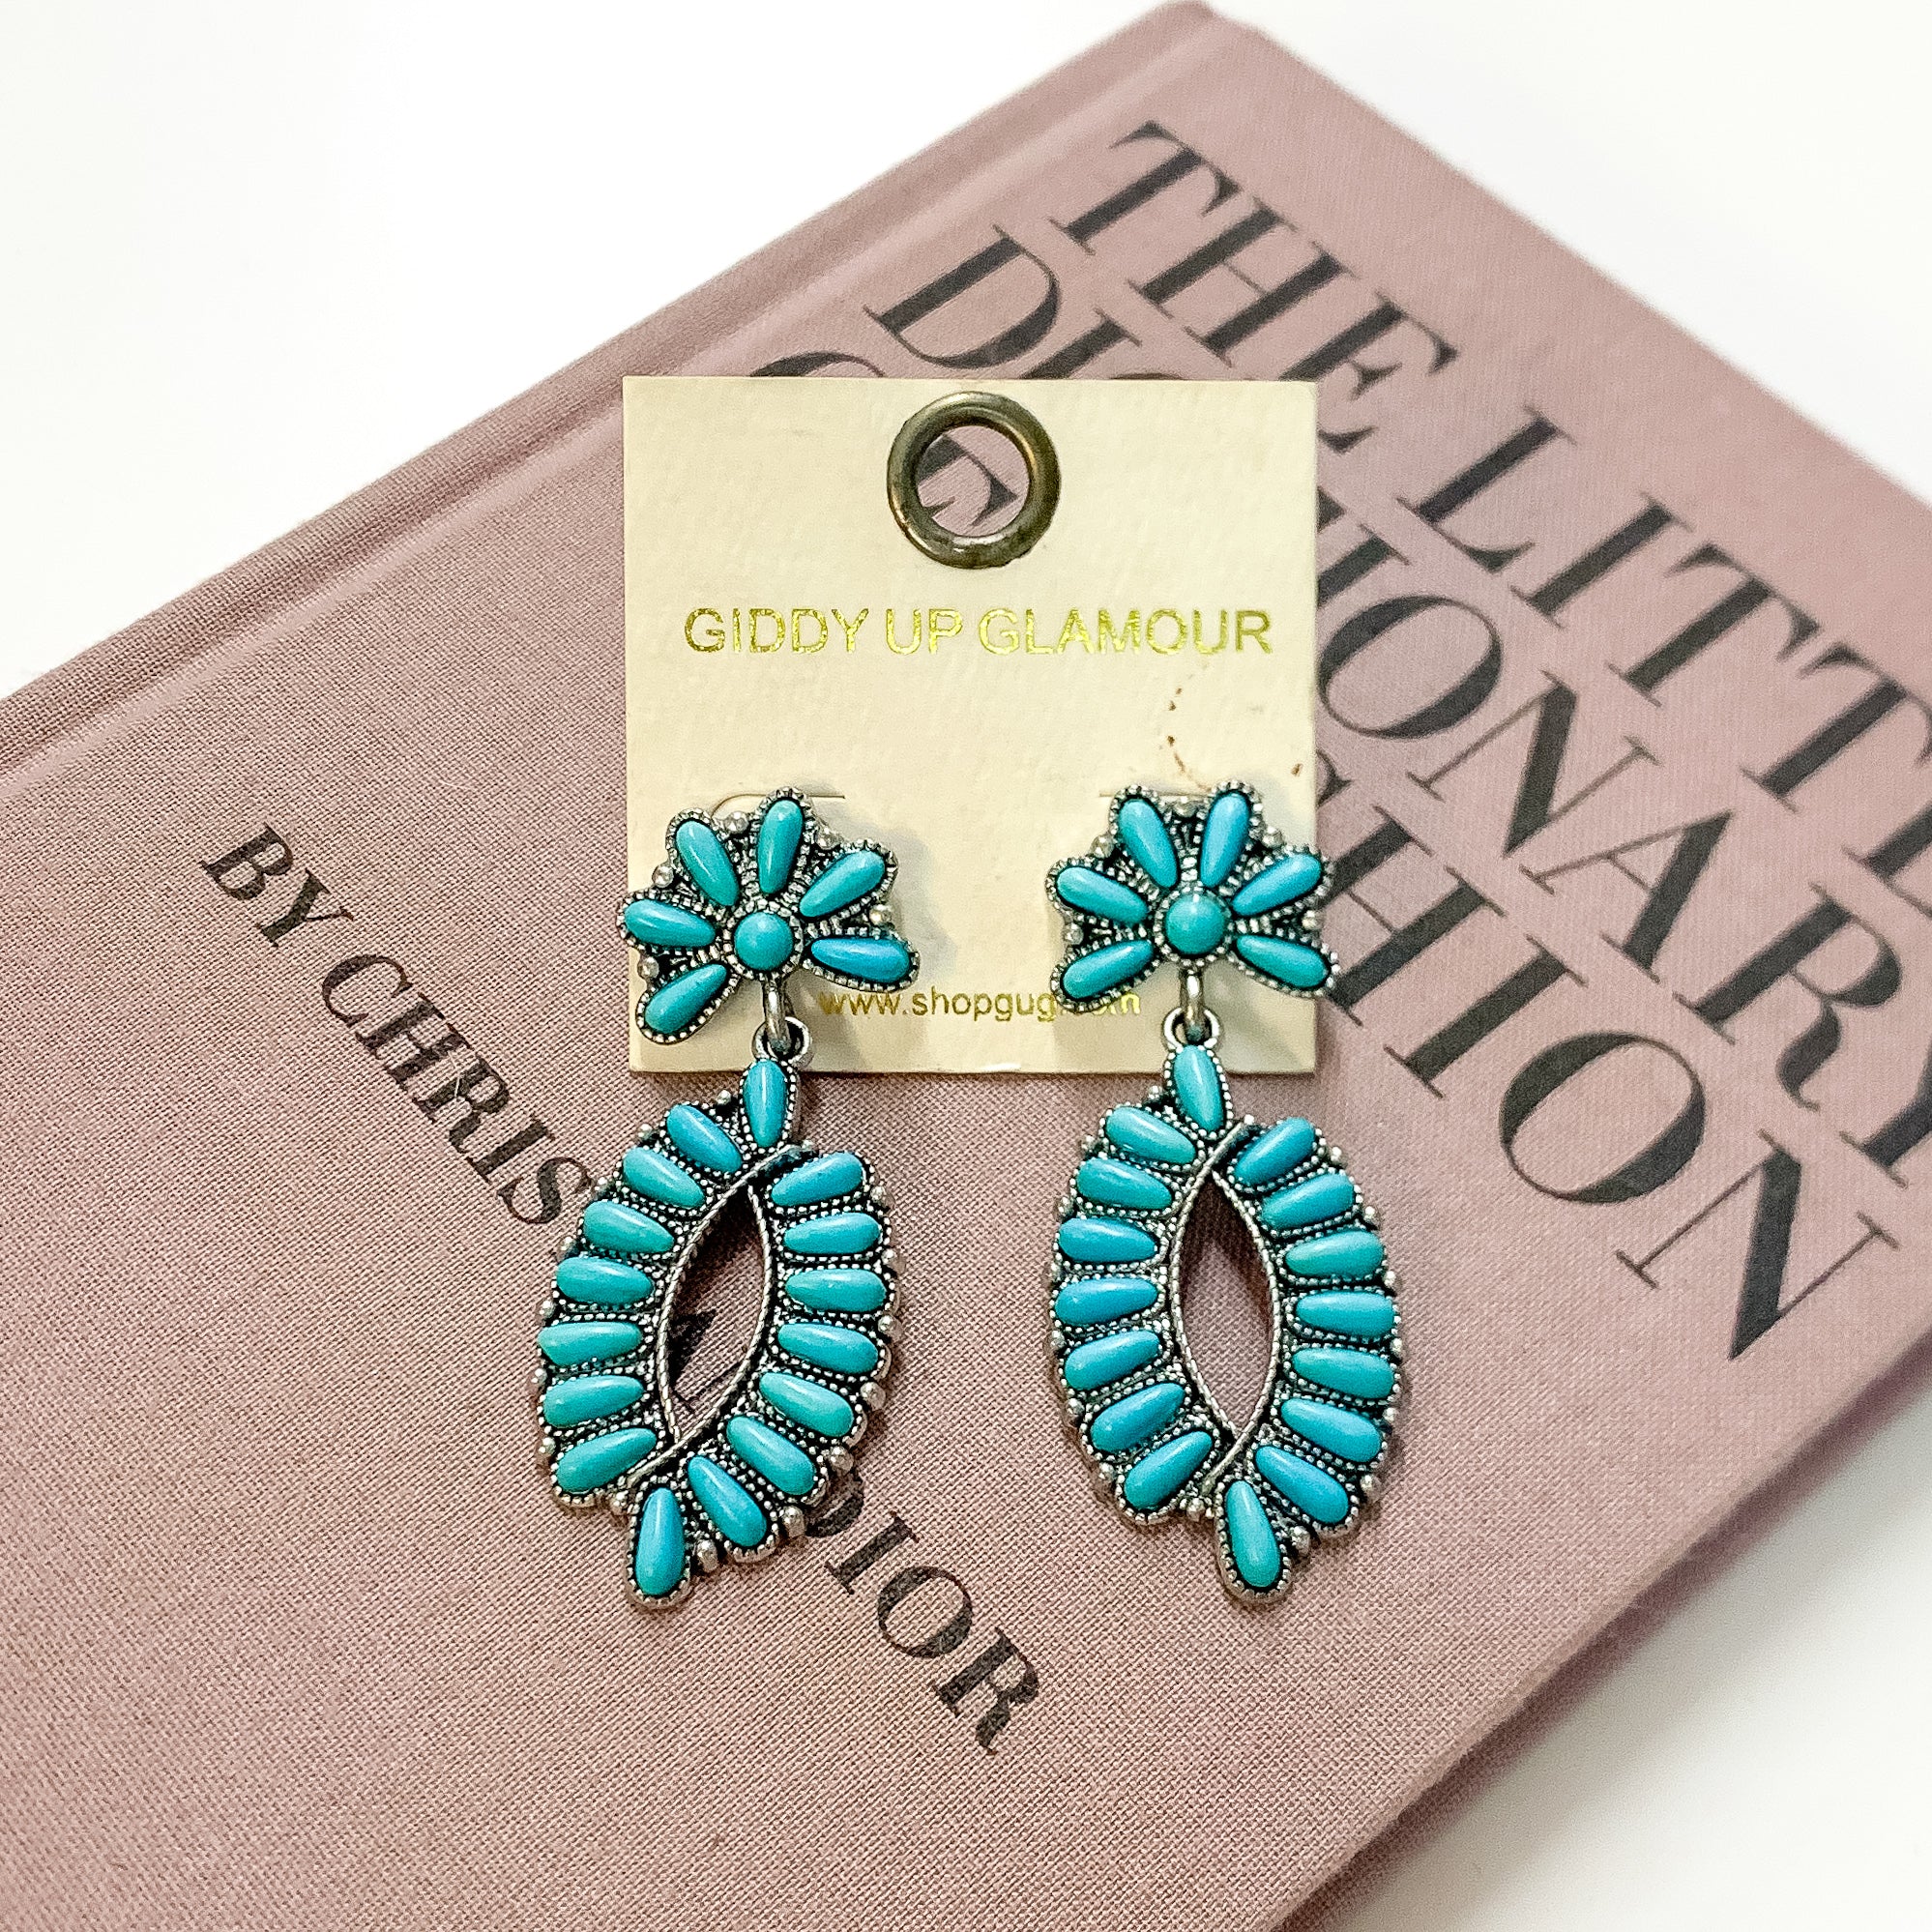 Western Oval Outline Cluster Drop Earrings in Turquoise Blue - Giddy Up Glamour Boutique